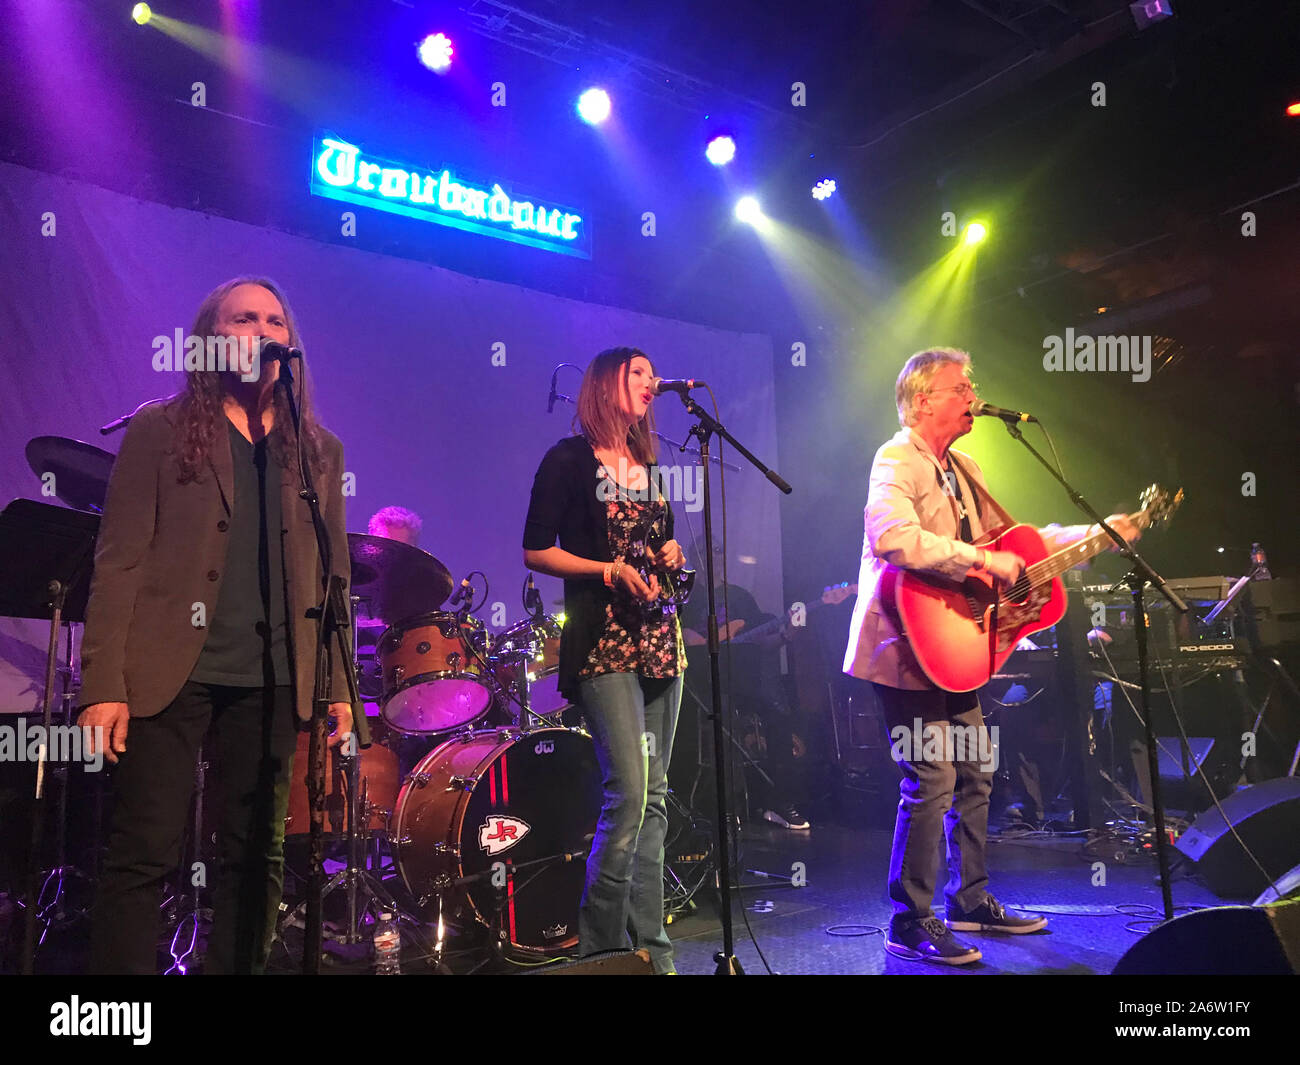 Richie Furay (right) and Timothy B. Schmidt (left)accompanied by Furay's daughter singing (center) at the Troubadour in Los Angeles circa 2019. Stock Photo